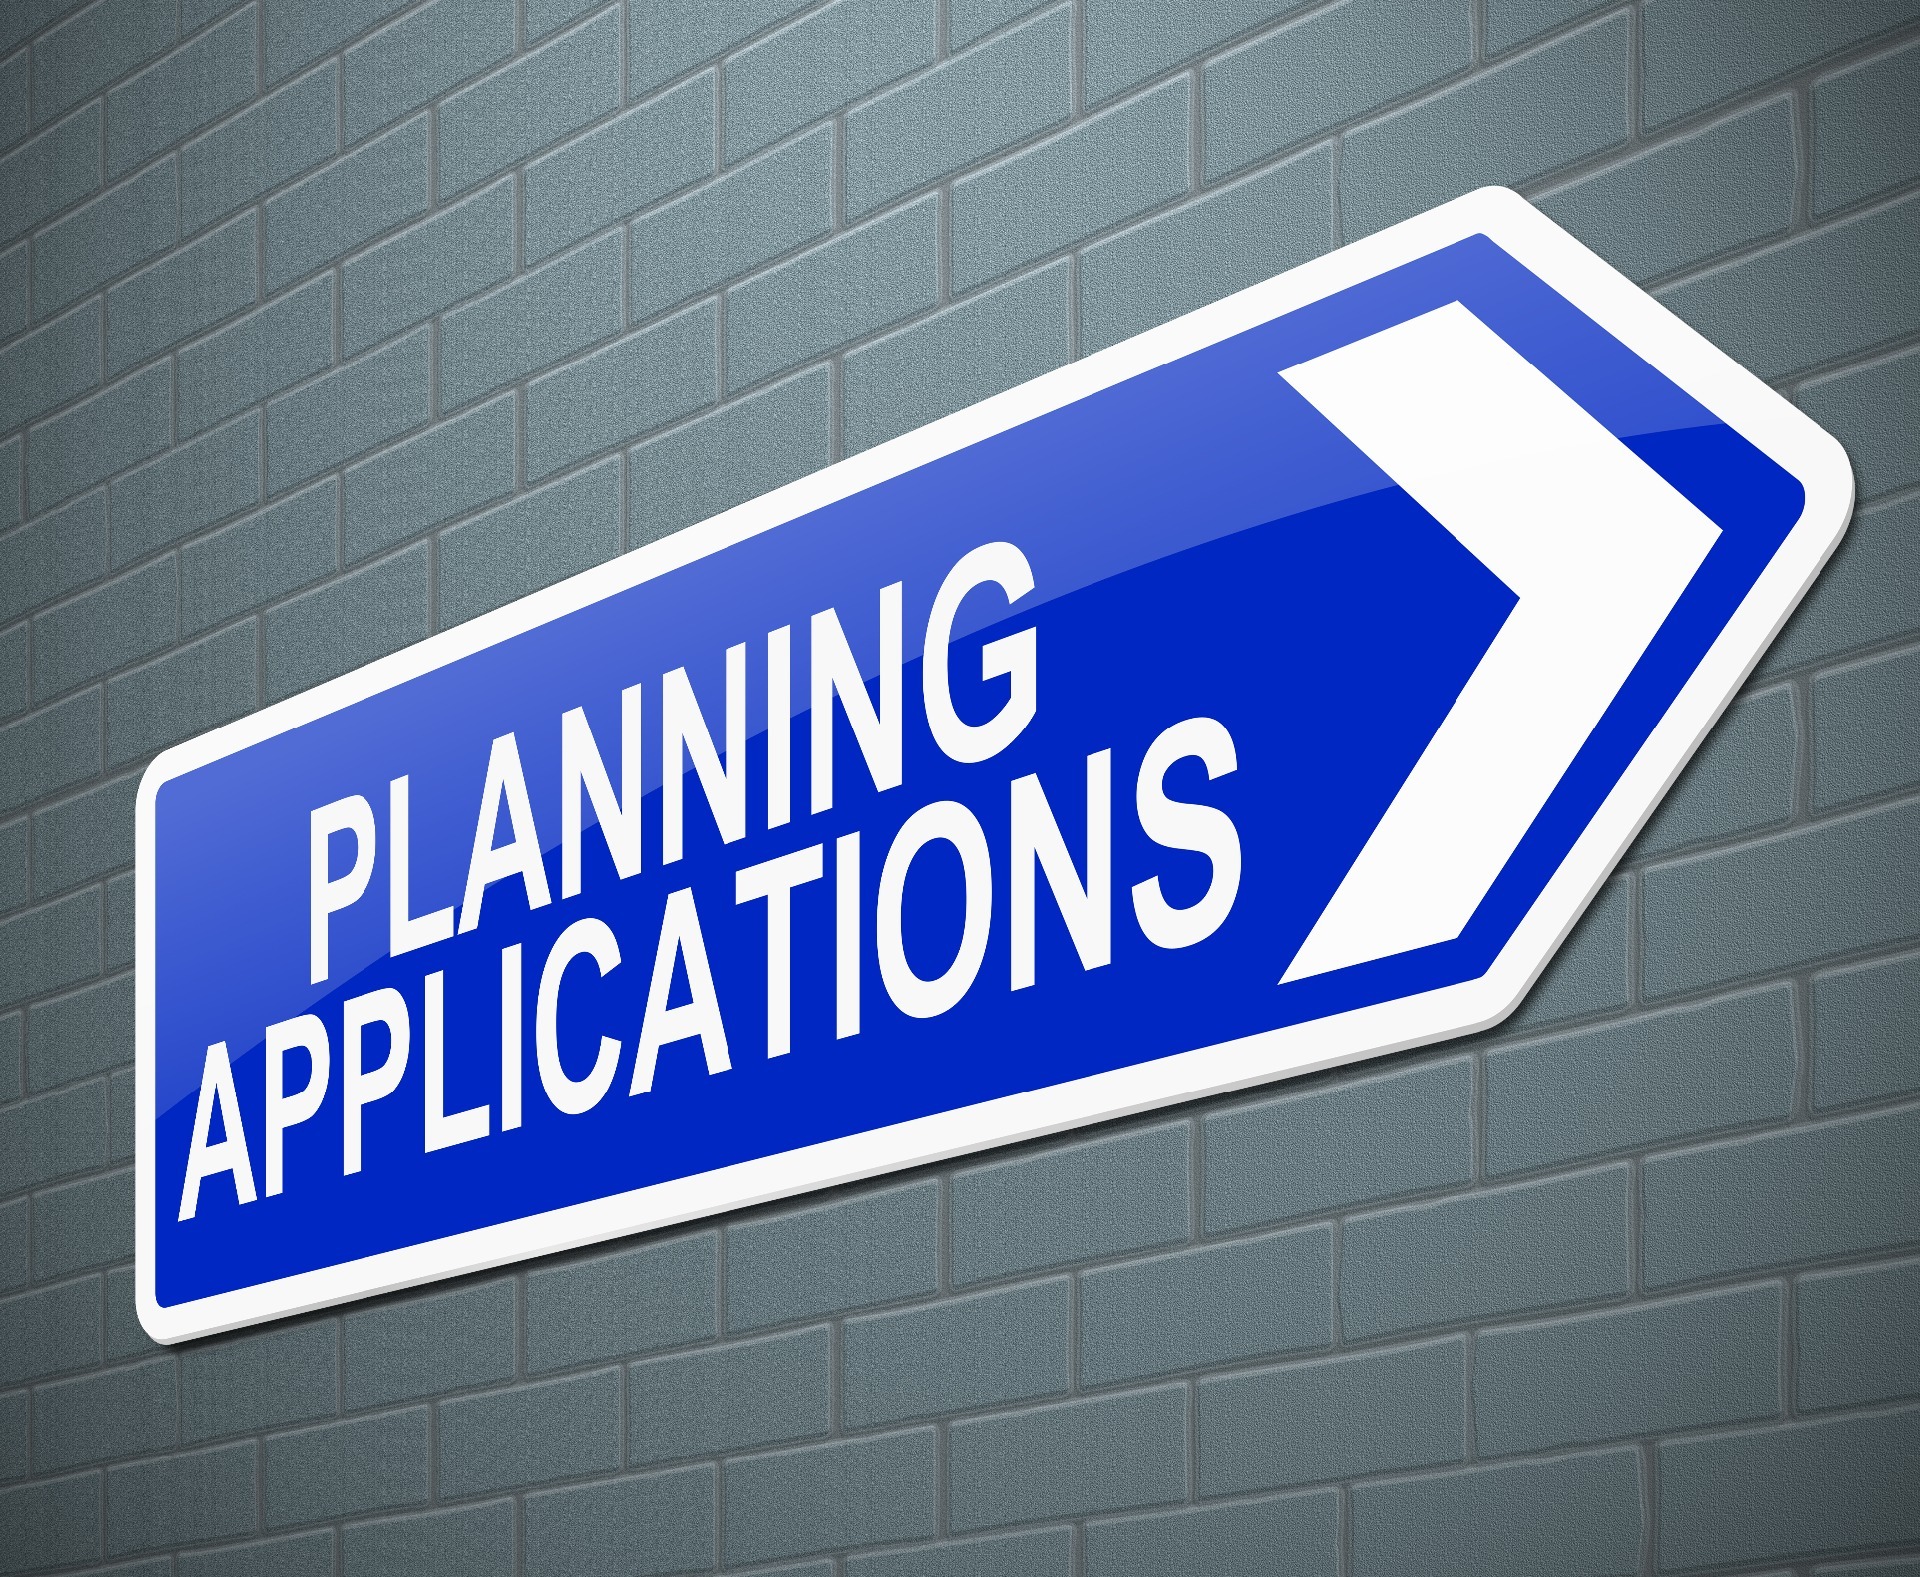 A blue and white sign in the shape of a directional arrow pointing towards 'Planning Applications'